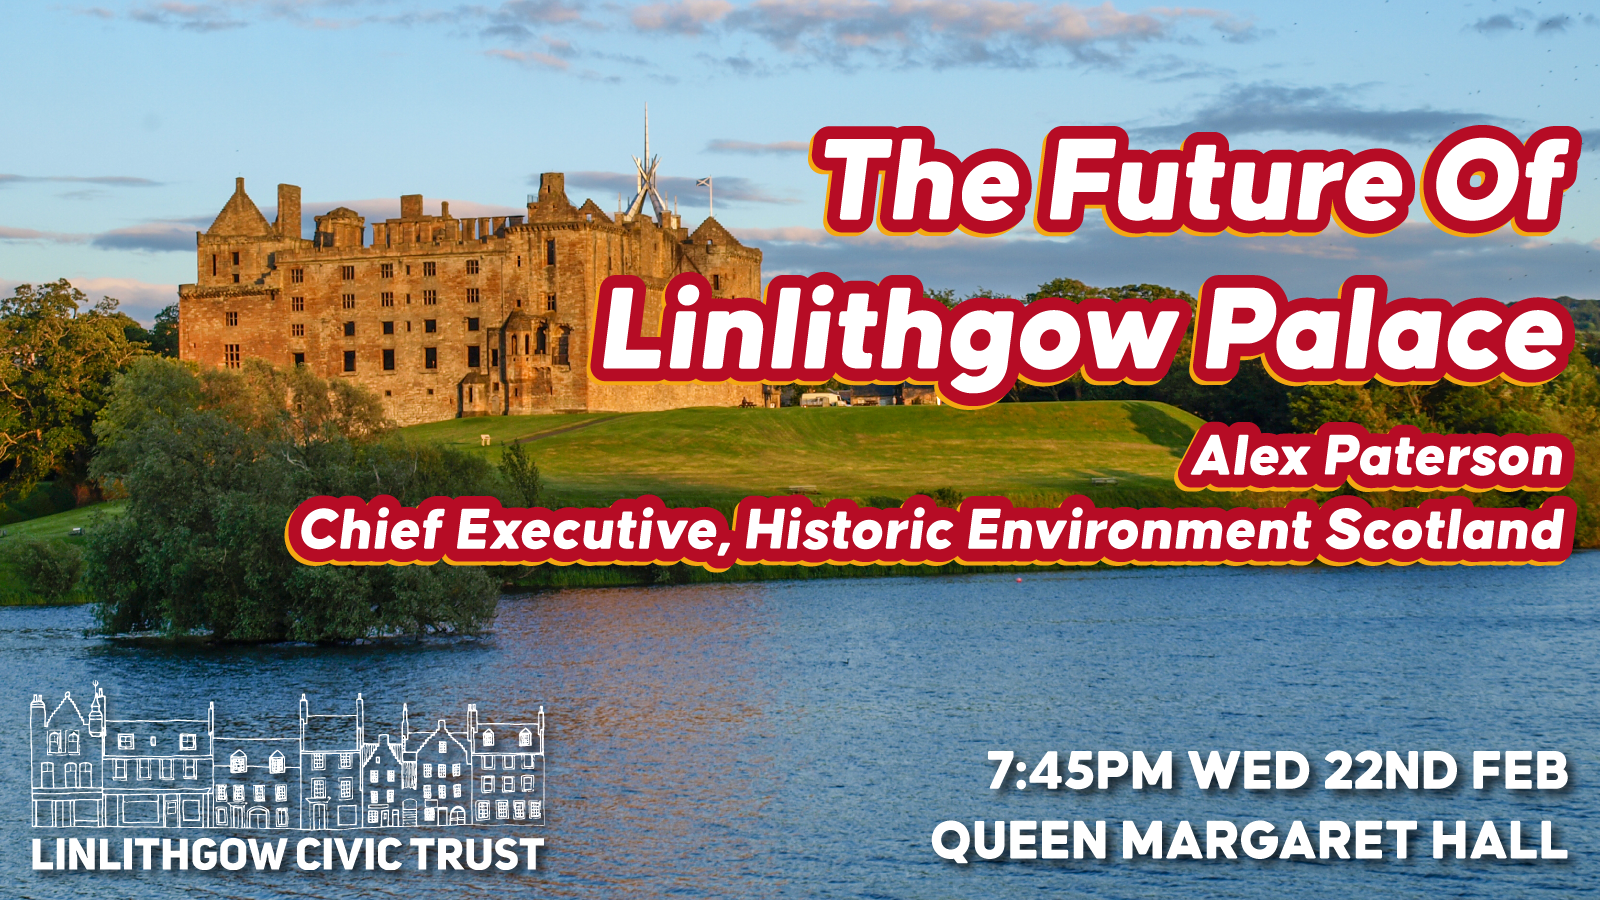 The Future of Linlithgow Palace talk poster